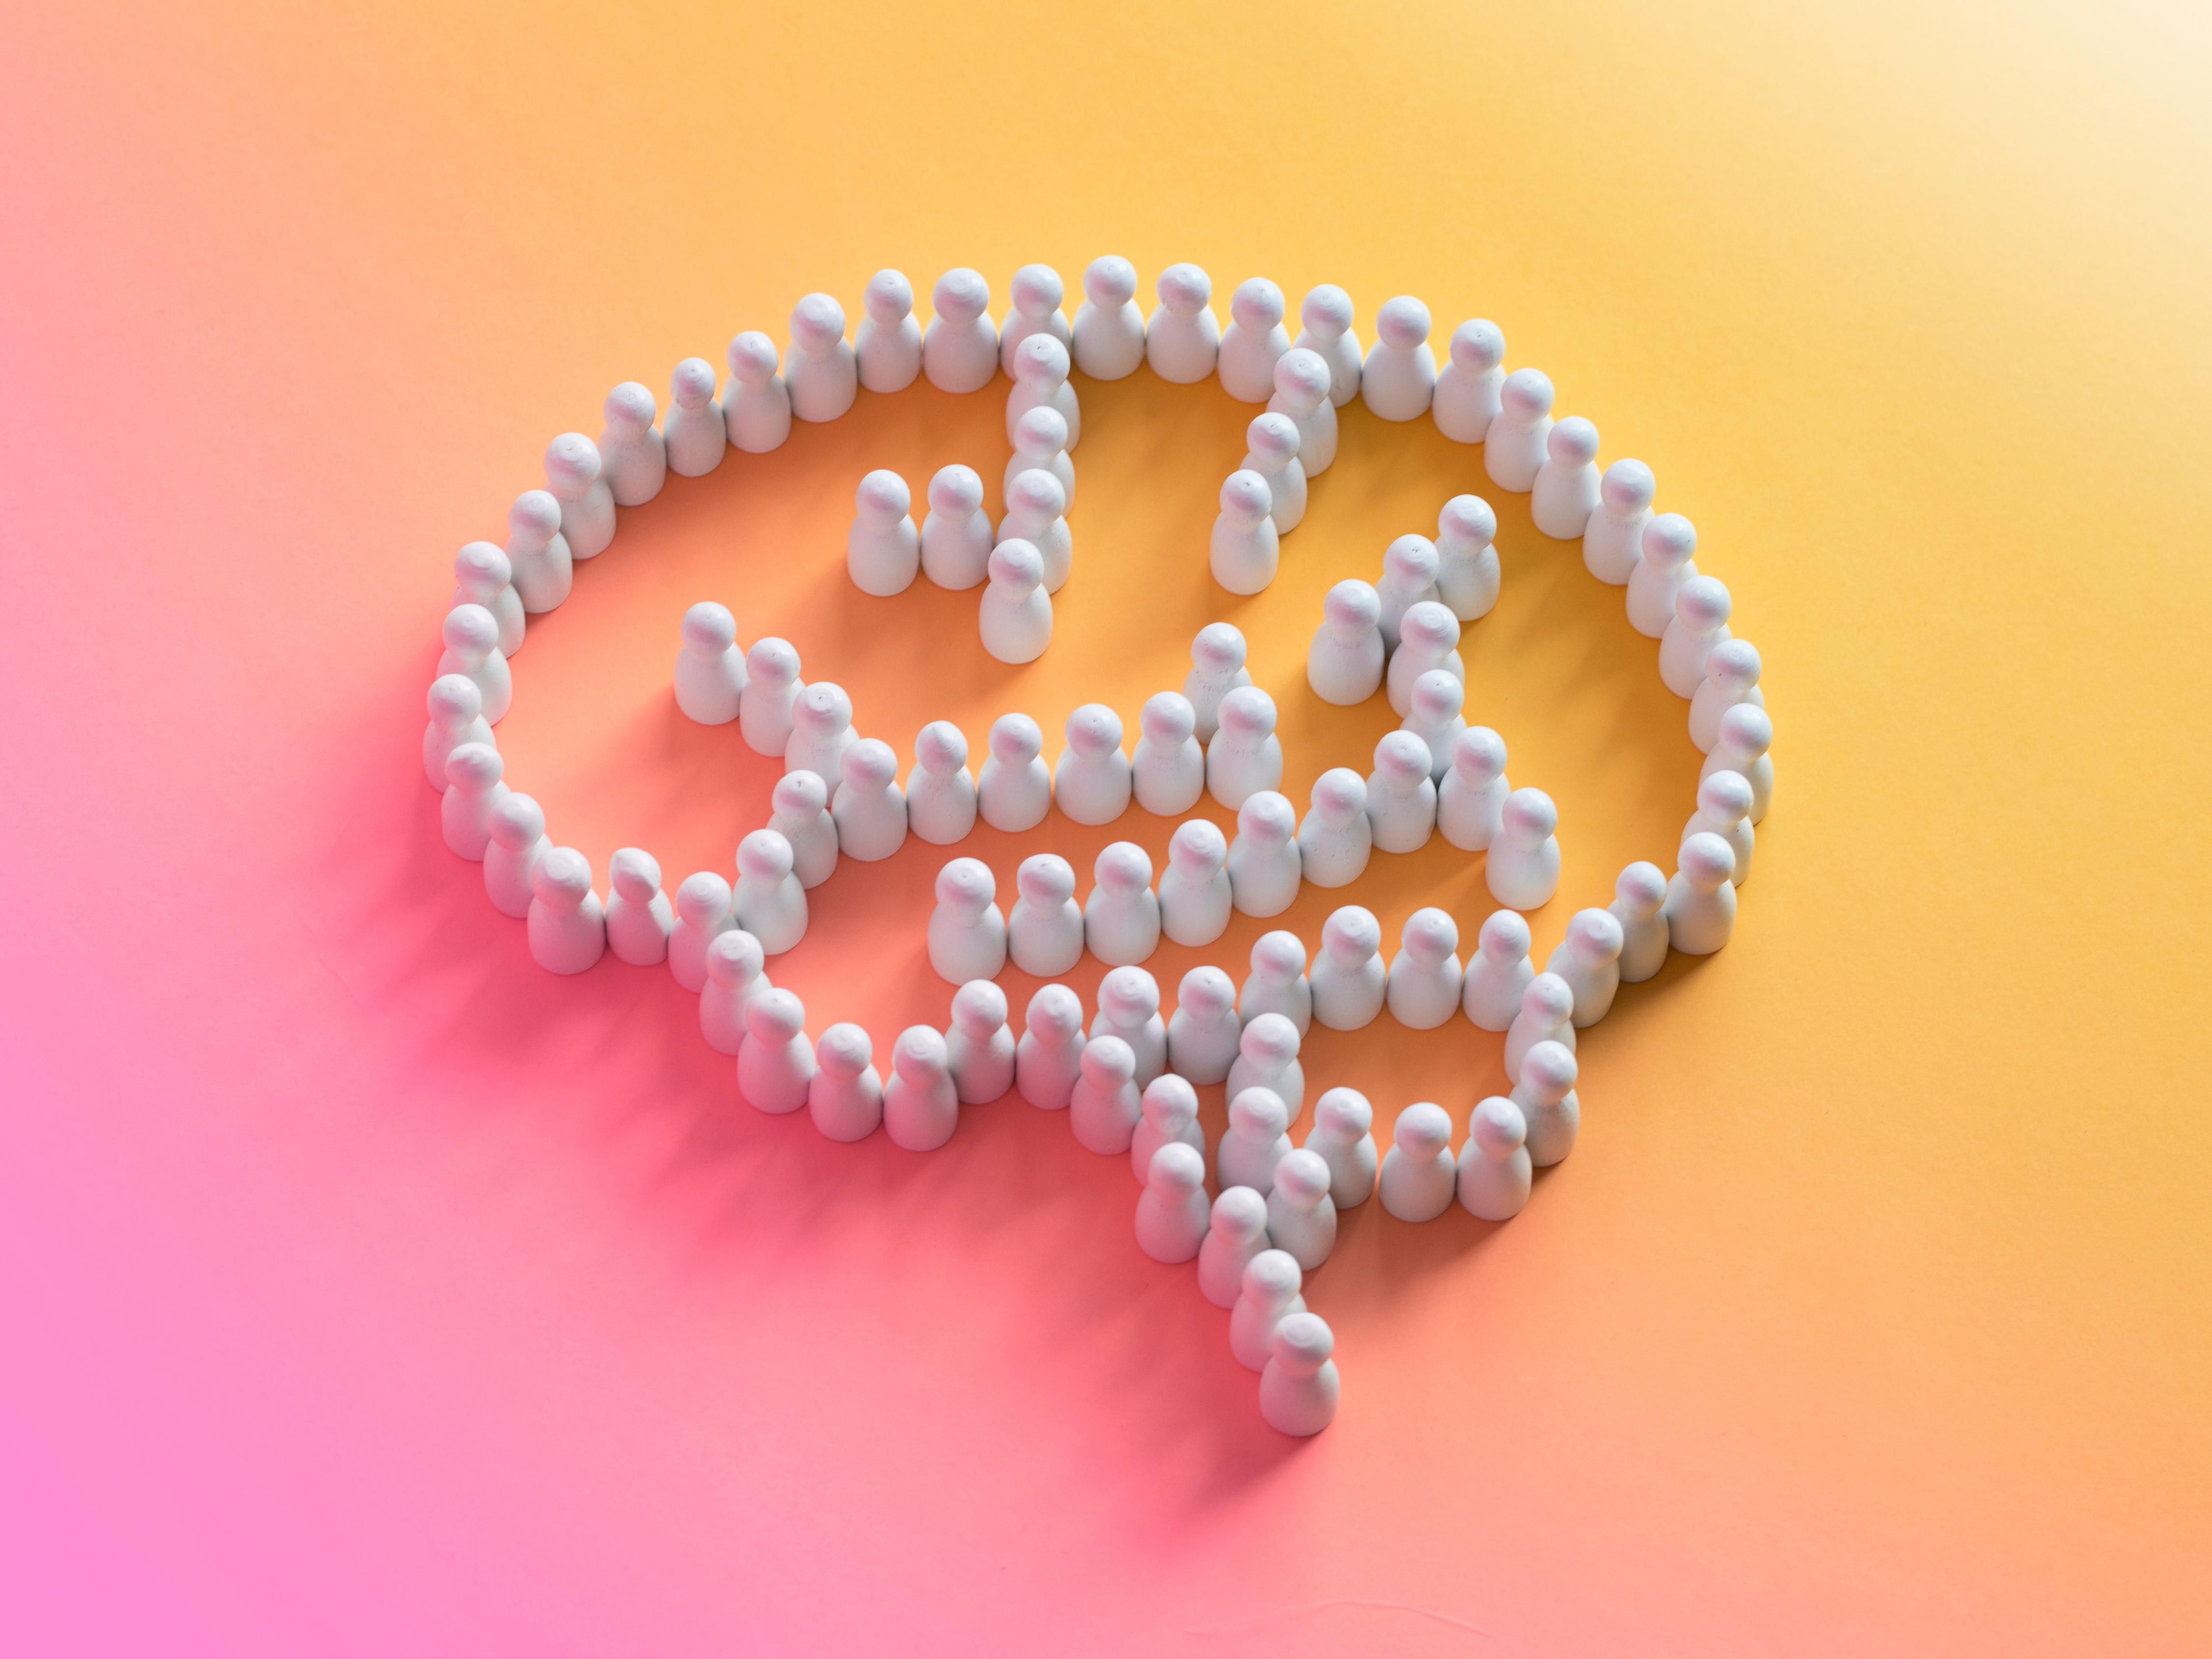 Small white figures collectively form a brain shape on a pink and orange background.